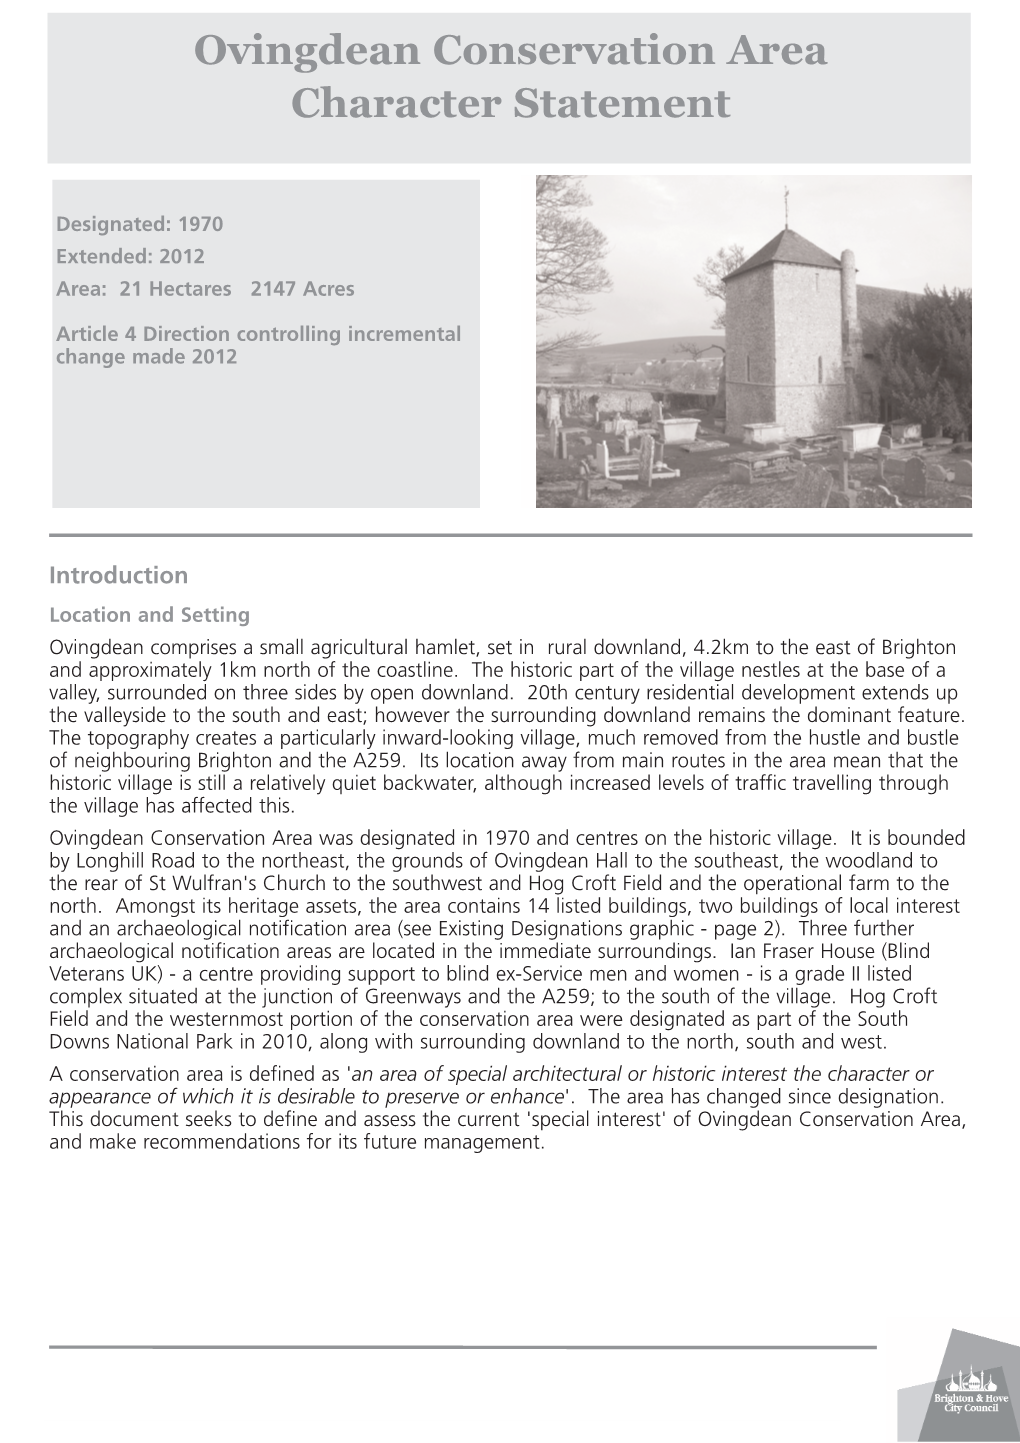 Ovingdean Conservation Area Character Statement